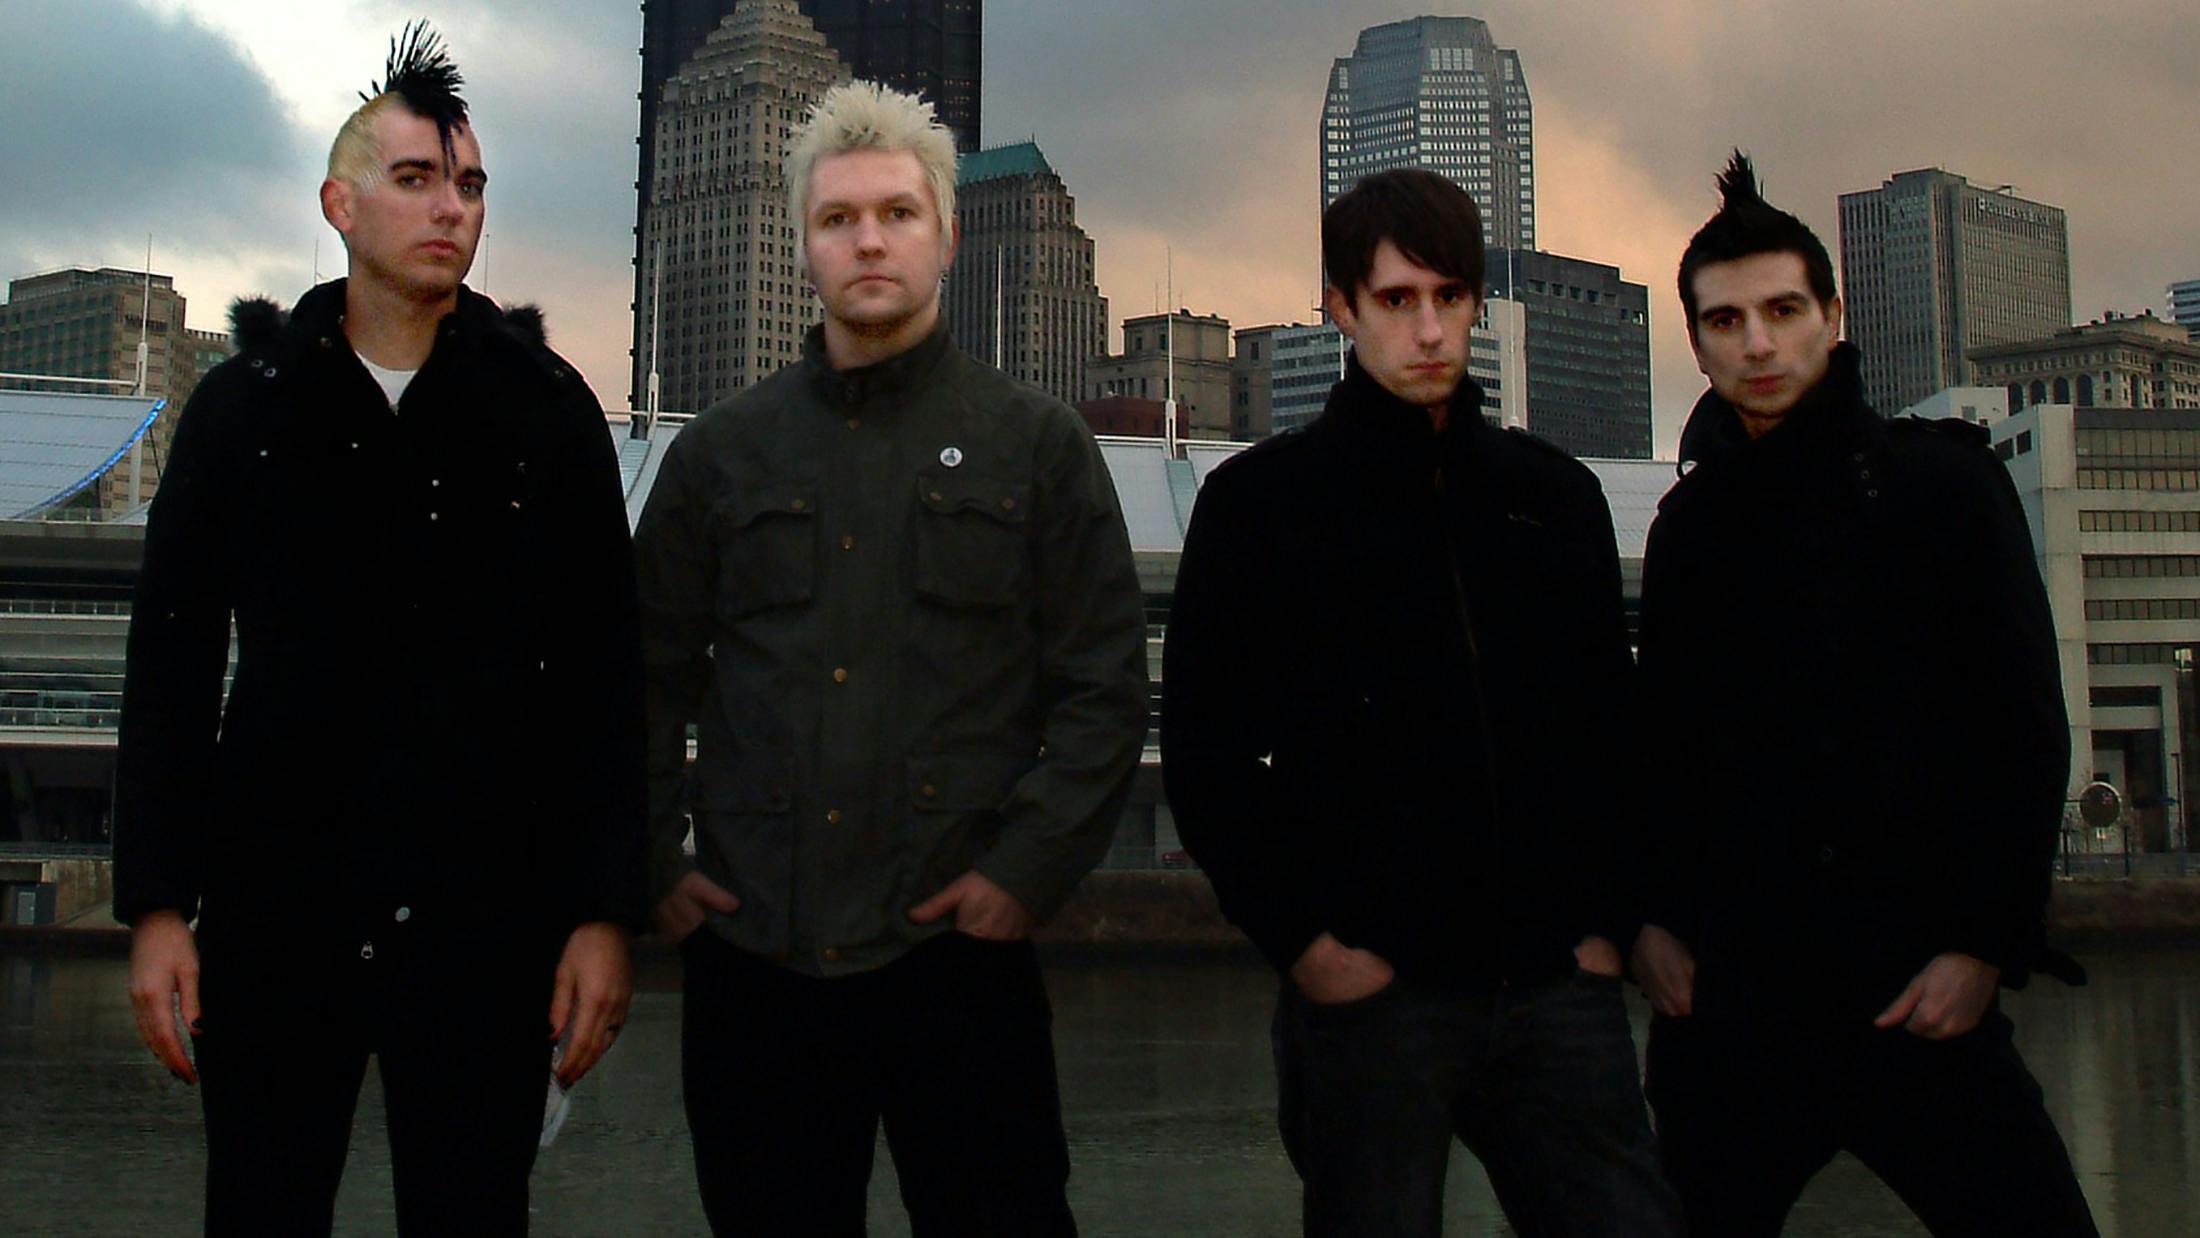 How We Wrote This Is The End (For You My Friend), By Anti-Flag's Justin Sane